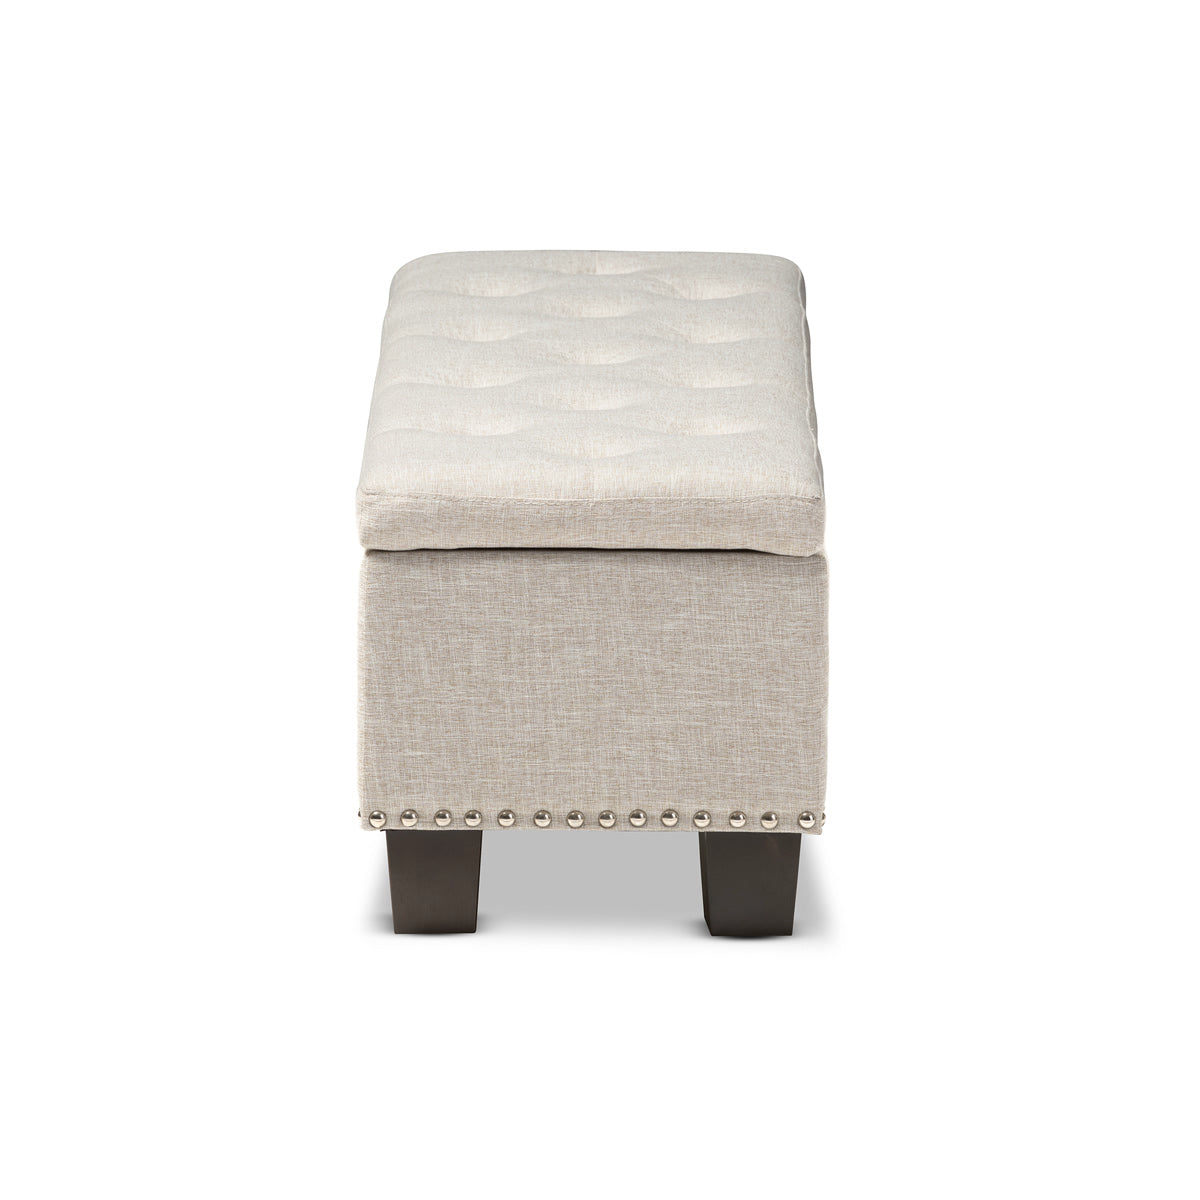 Baxton Studio Hannah Modern and Contemporary Beige Fabric Upholstered Button-Tufting Storage Ottoman Bench Baxton Studio-benches-Minimal And Modern - 5